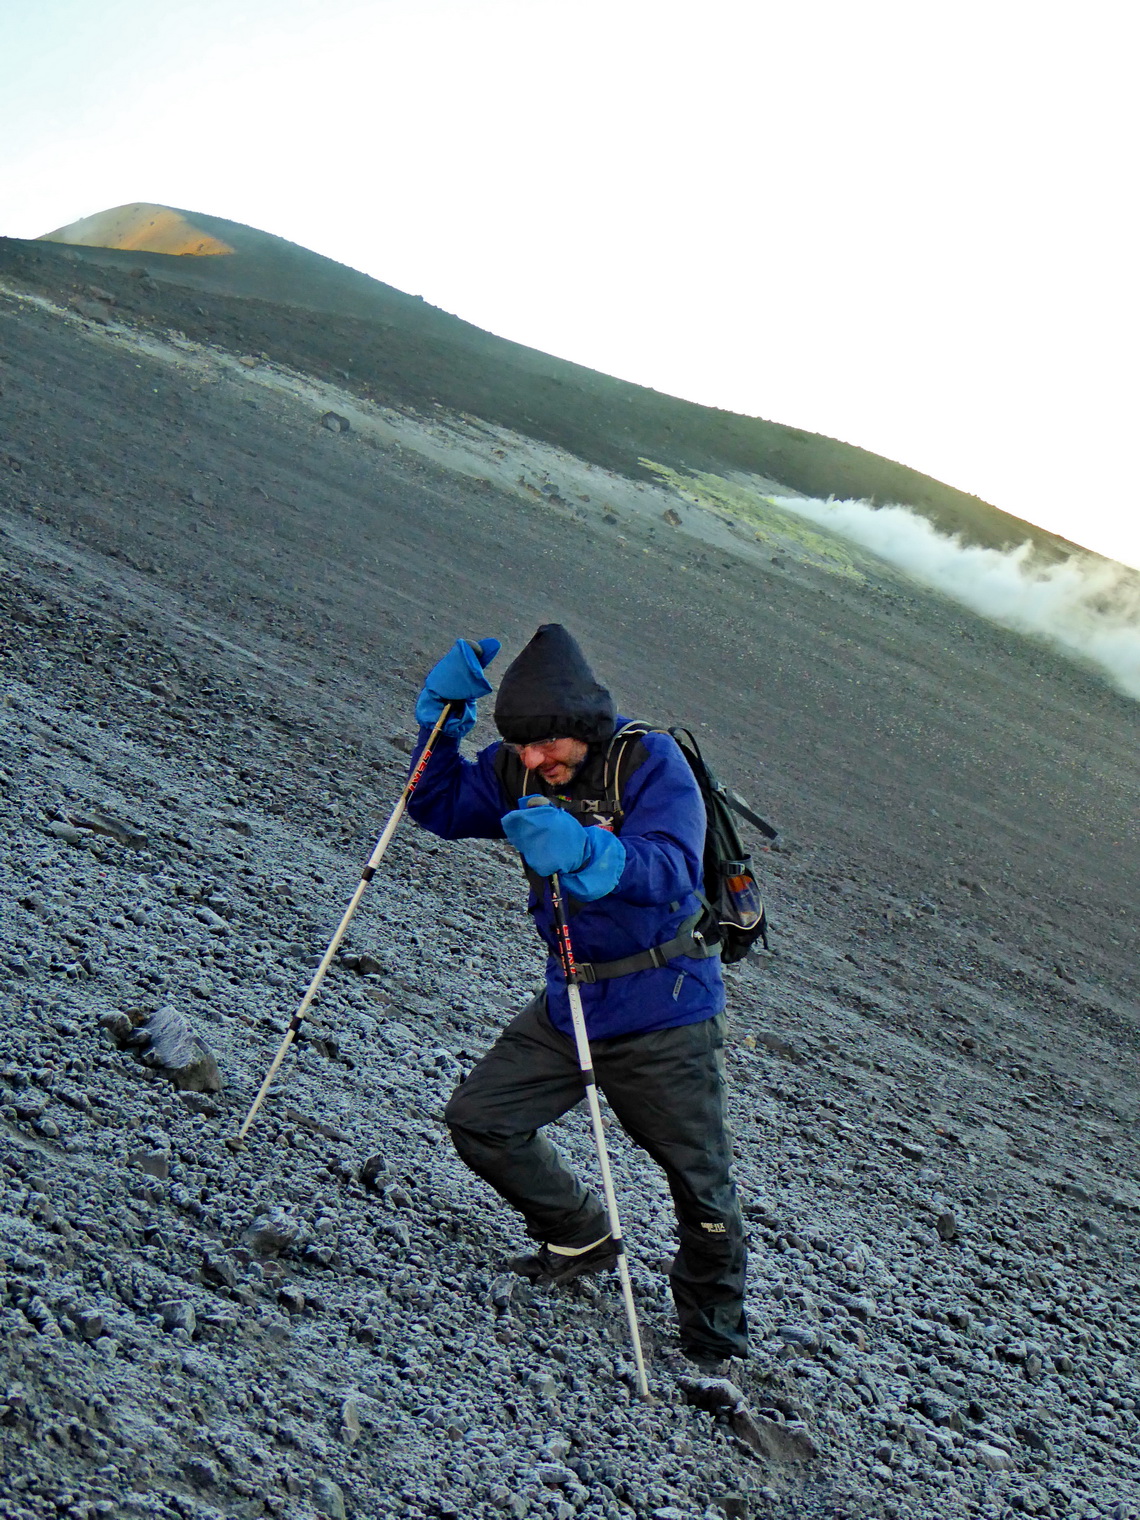 Fighting against the storm on smoking Volcan Puracé